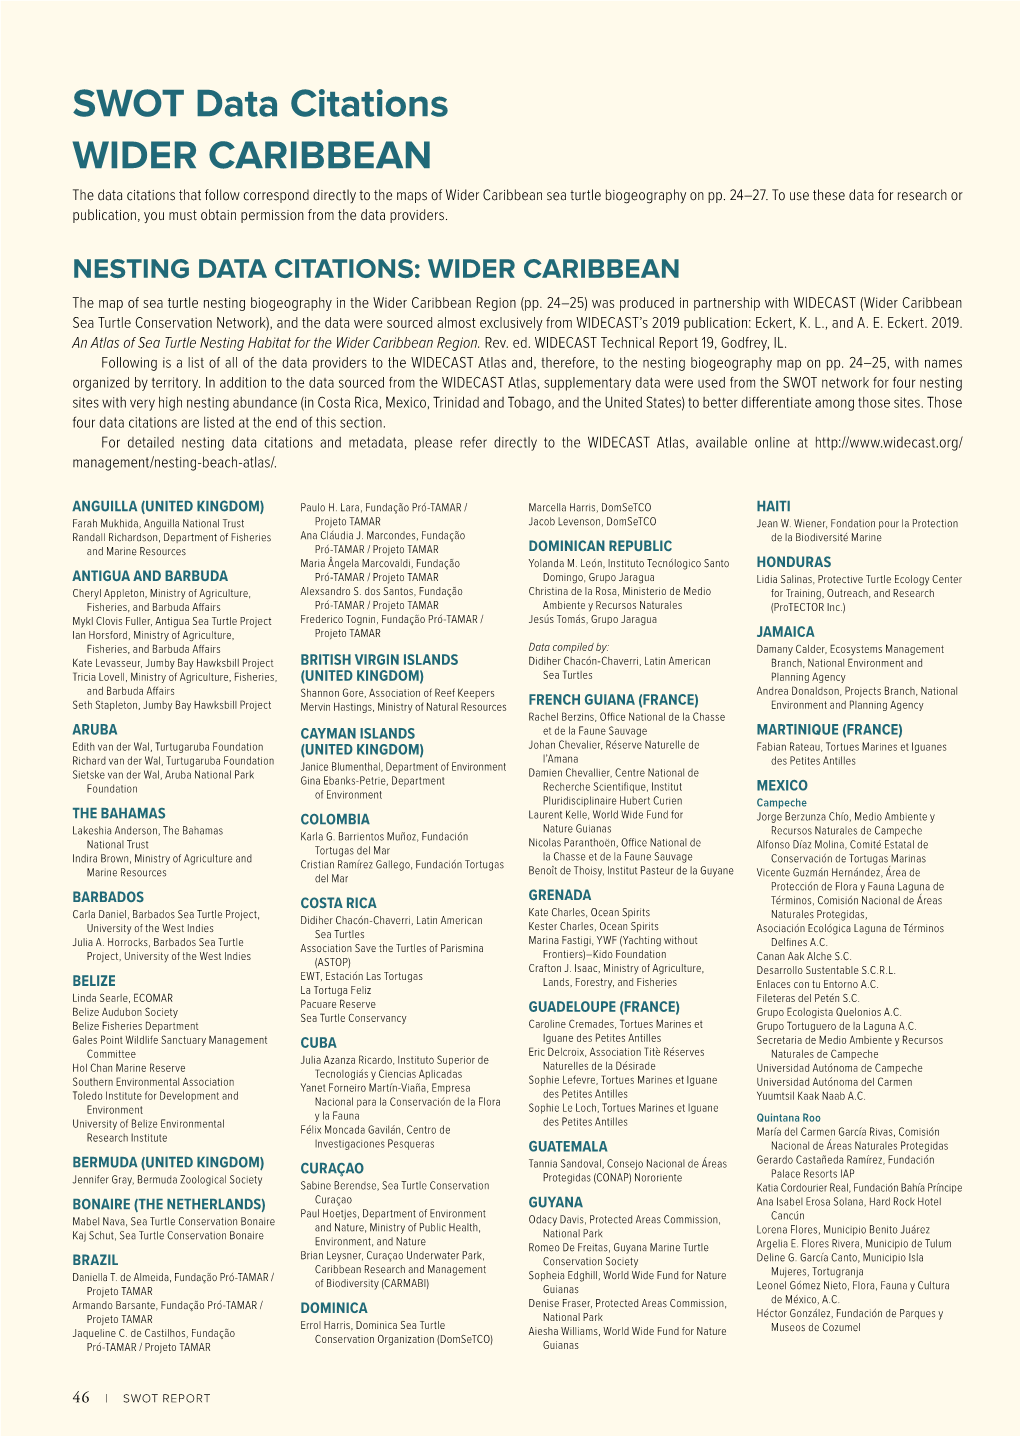 SWOT Data Citations WIDER CARIBBEAN the Data Citations That Follow Correspond Directly to the Maps of Wider Caribbean Sea Turtle Biogeography on Pp